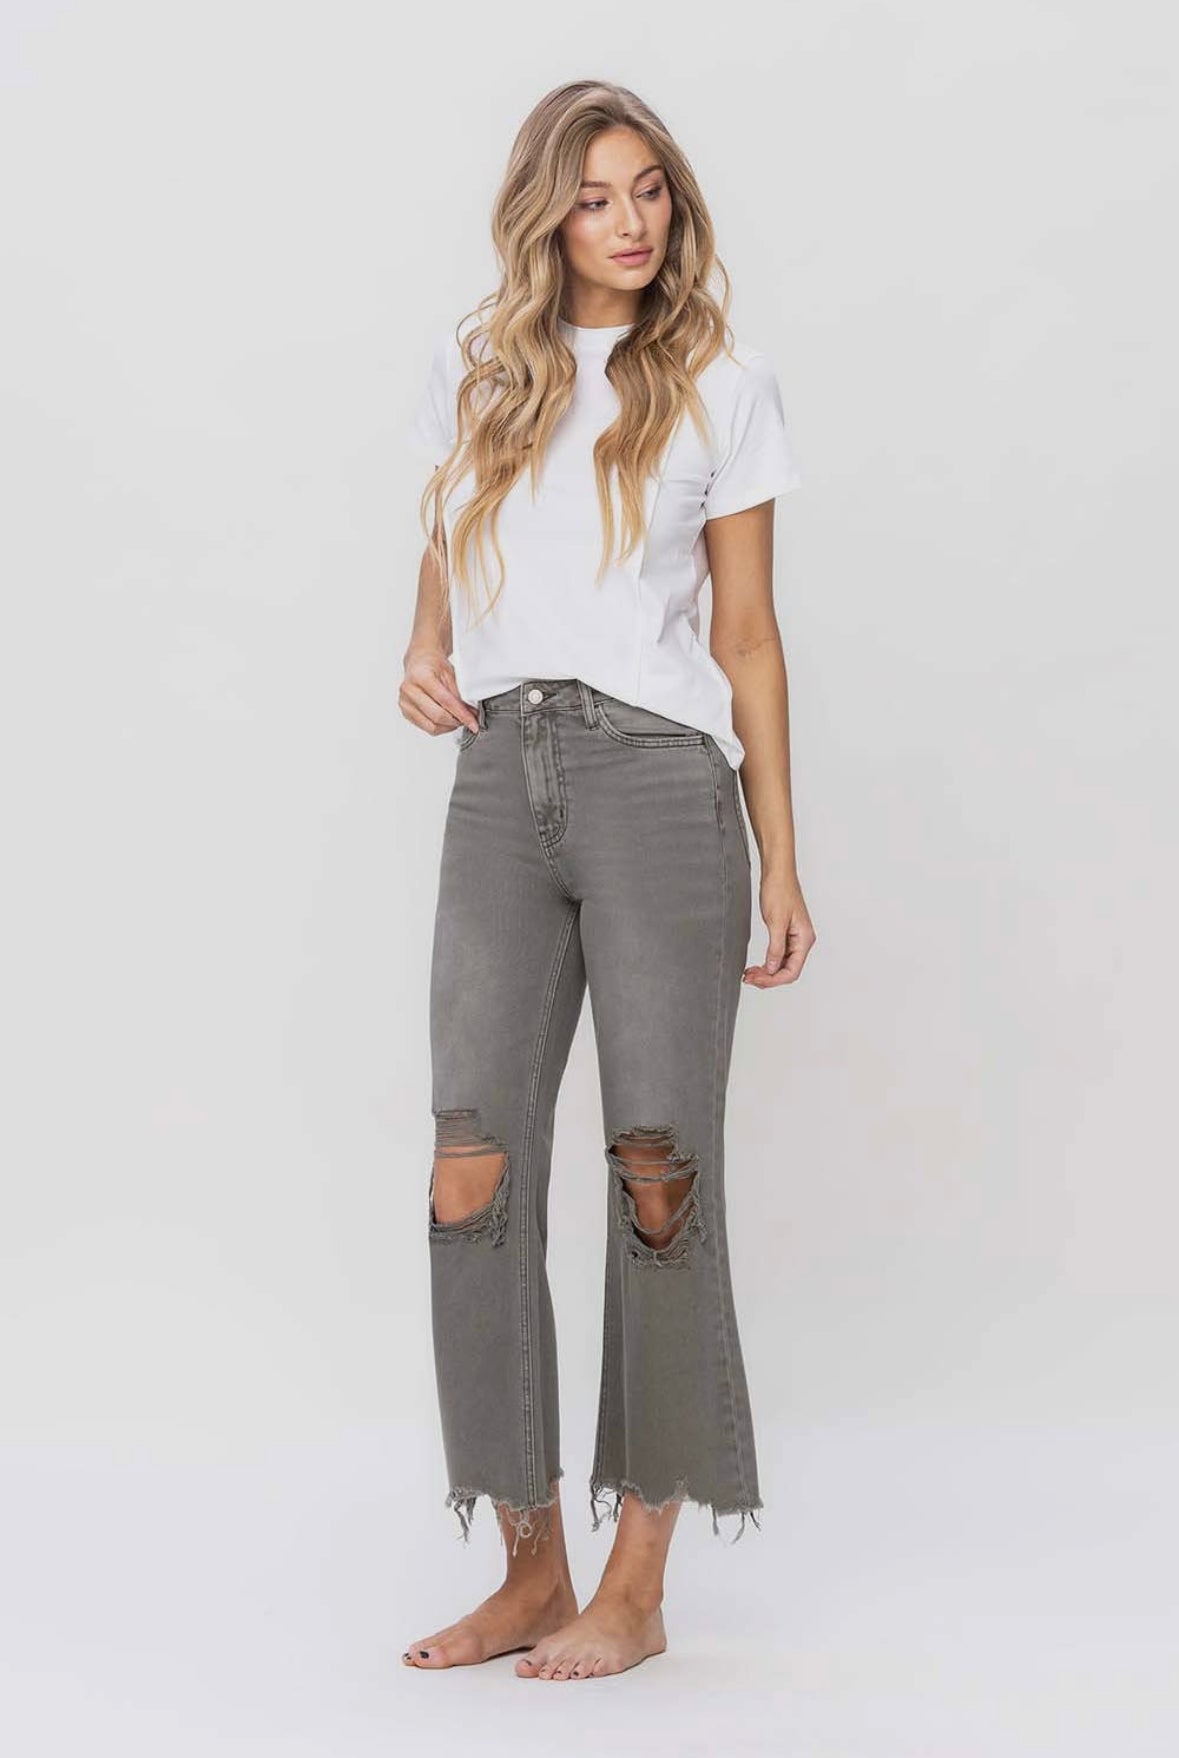 90s Vintage Flare Jeans in Bettle